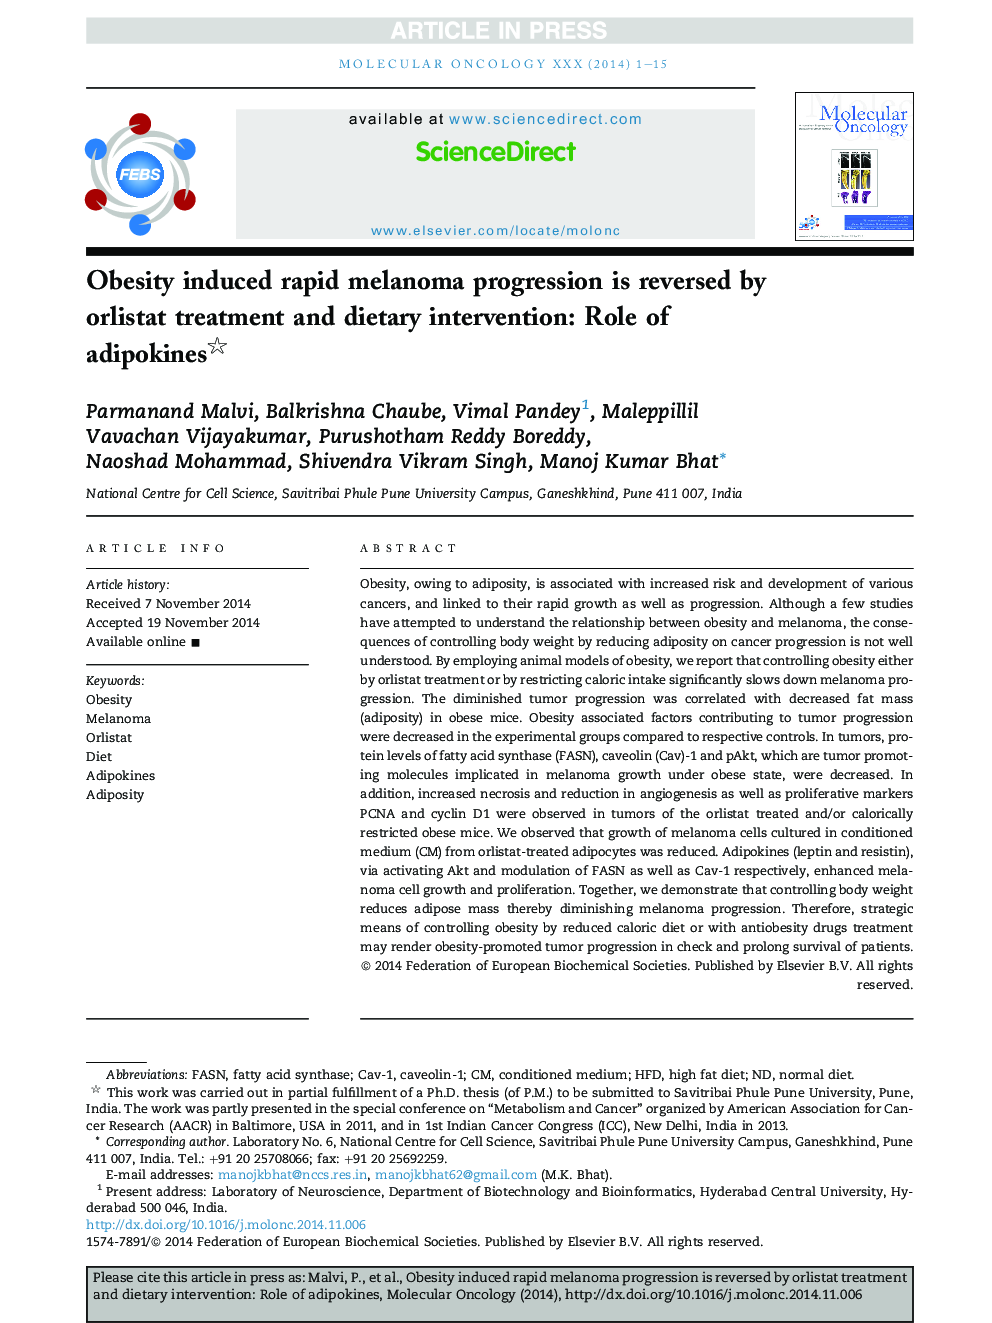 Obesity induced rapid melanoma progression is reversed by orlistat treatment and dietary intervention: Role of adipokines